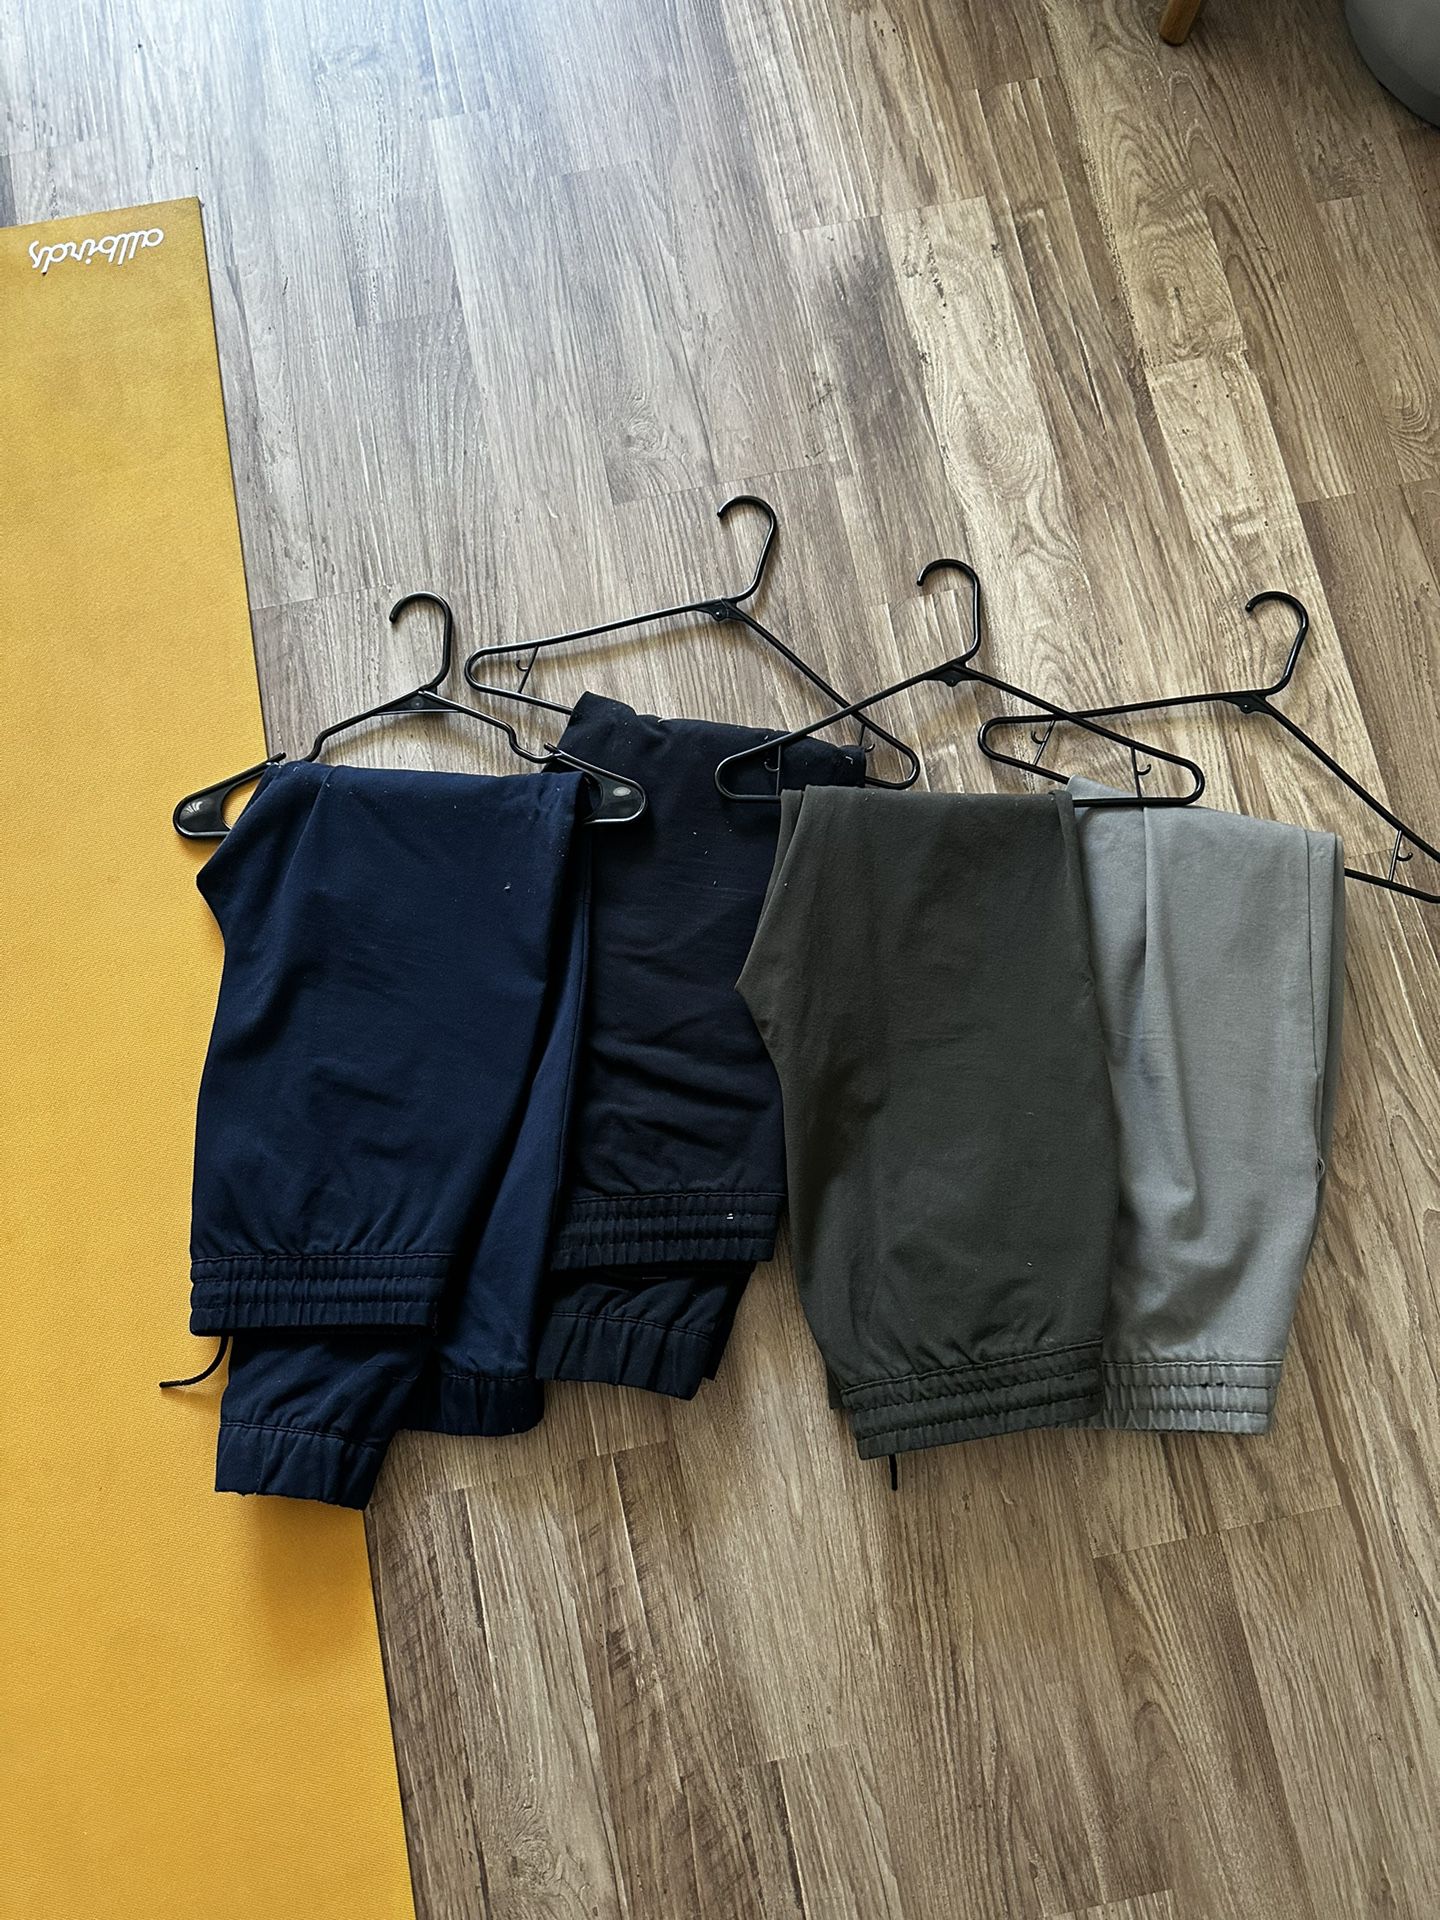 Abercrombie Joggers $15 Each Or $40 All 